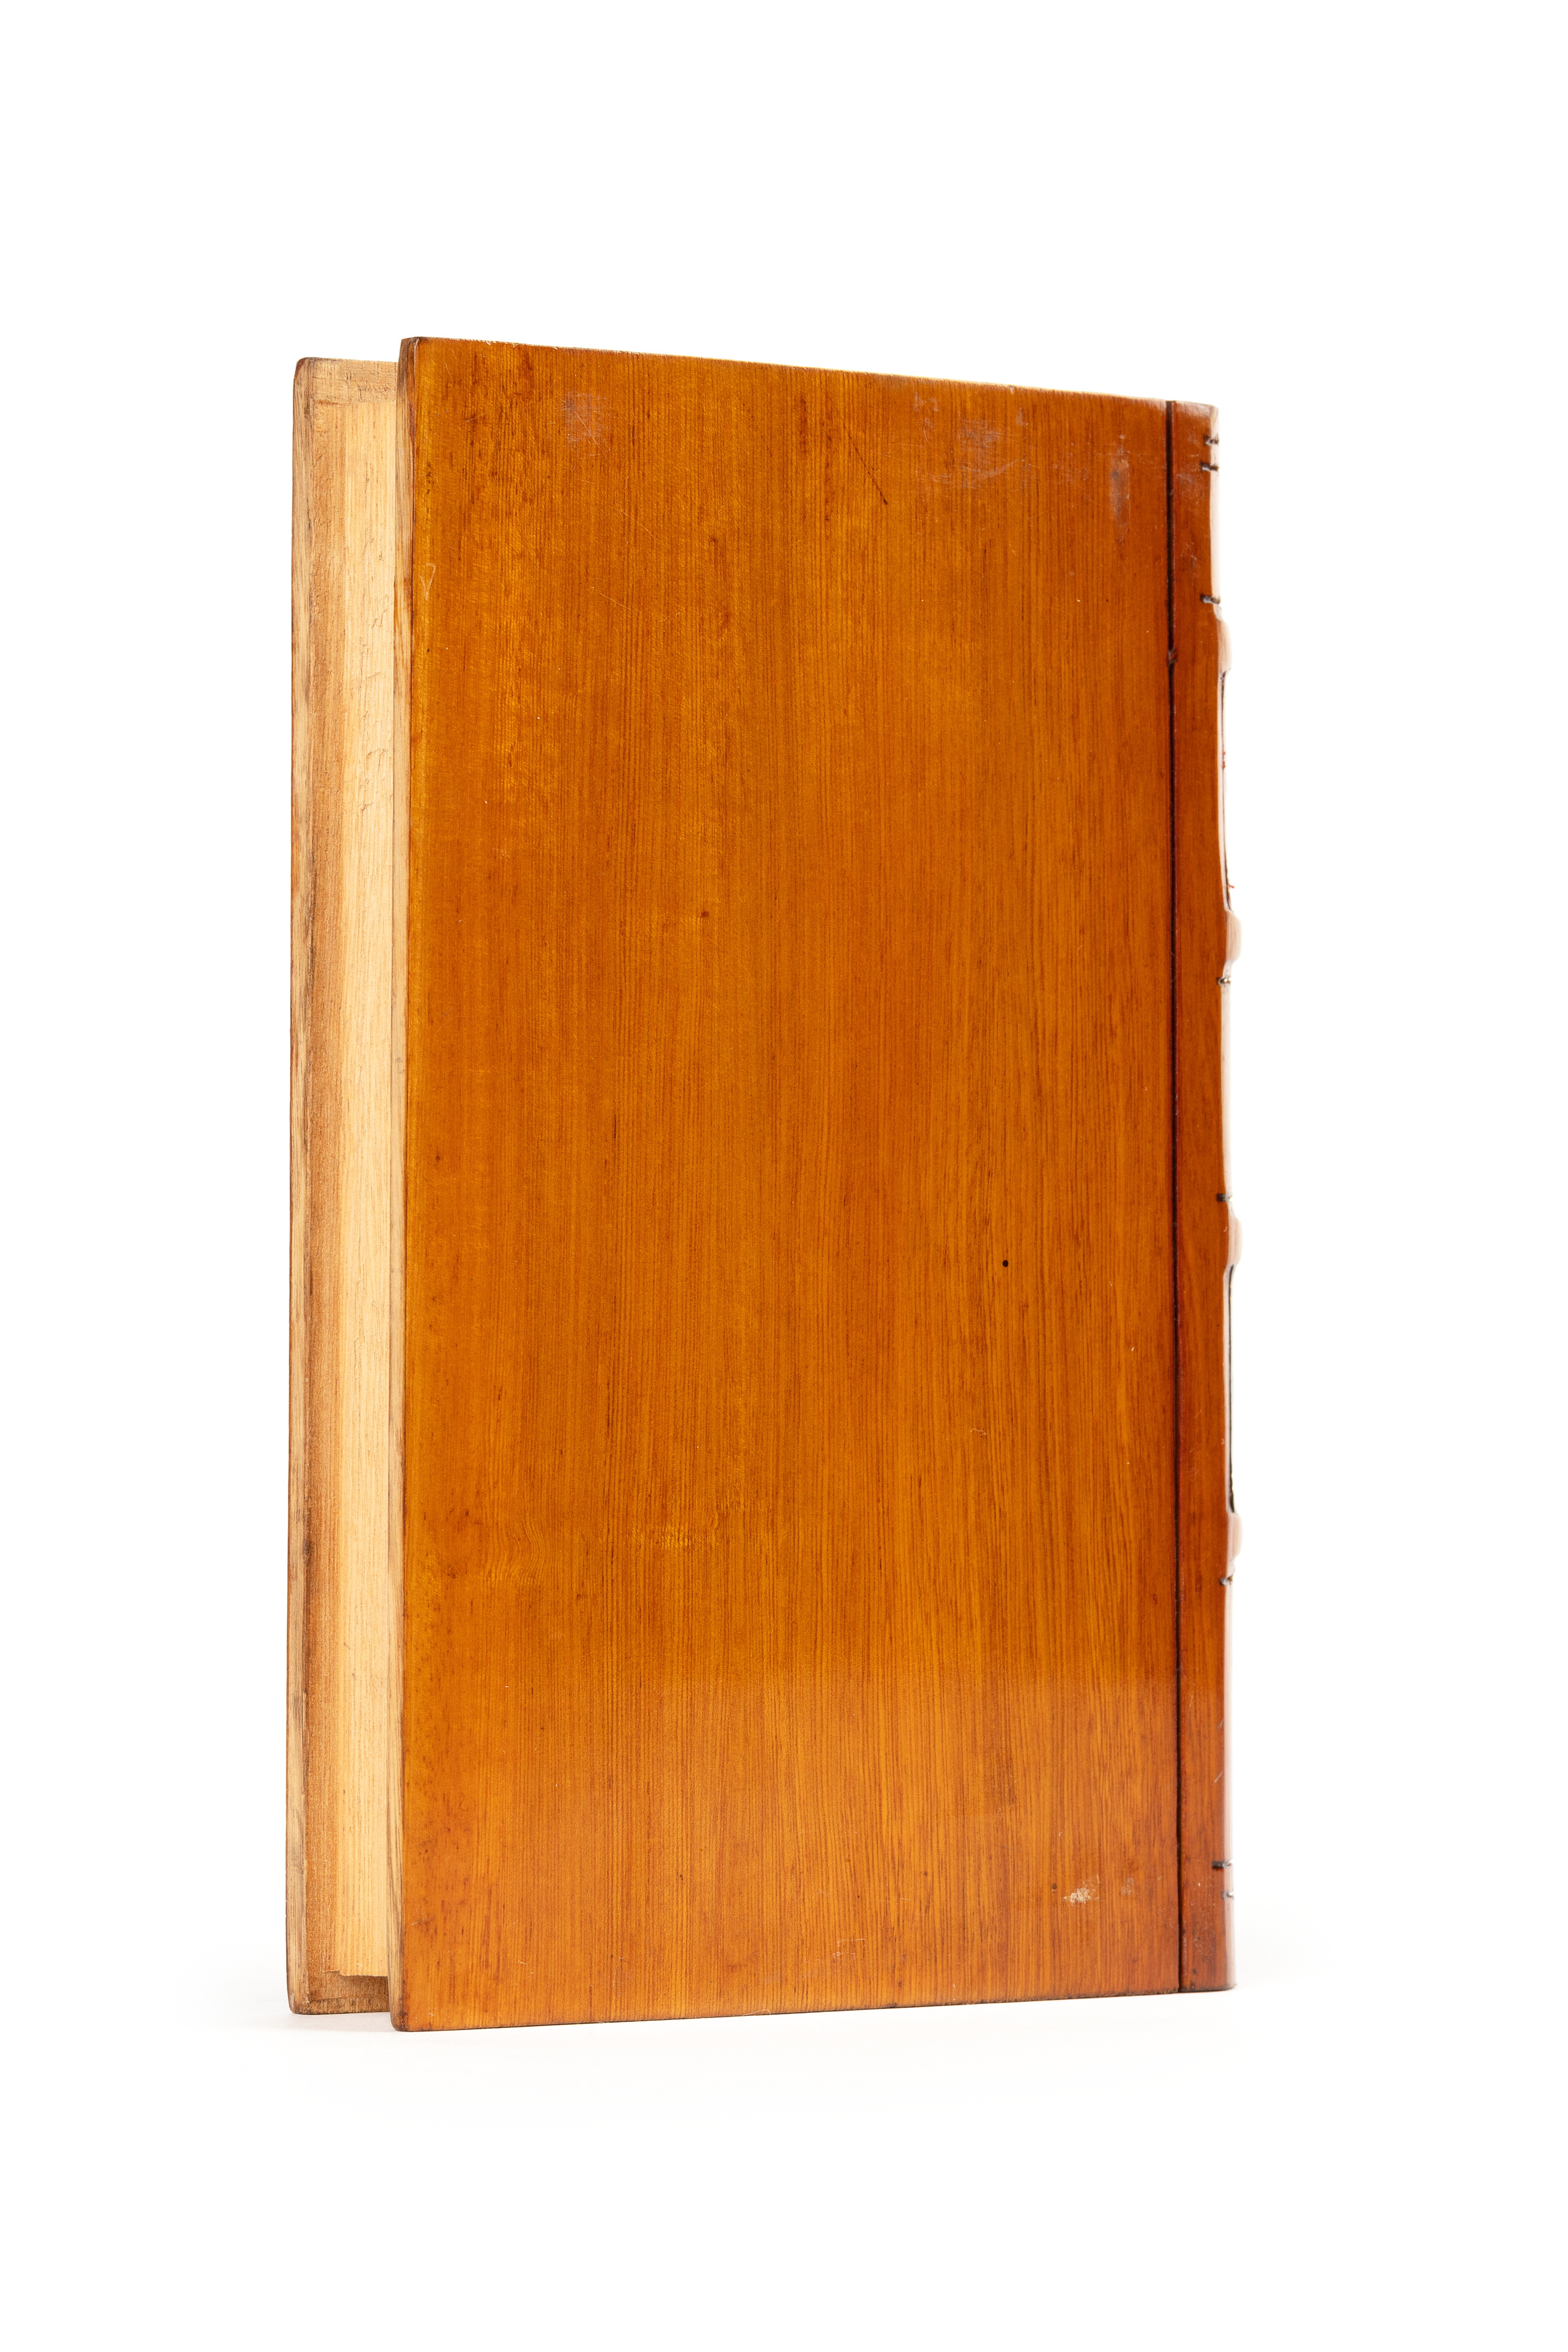 'Aphananthe philippinensis / Native Elm' timber sample in the form of a book